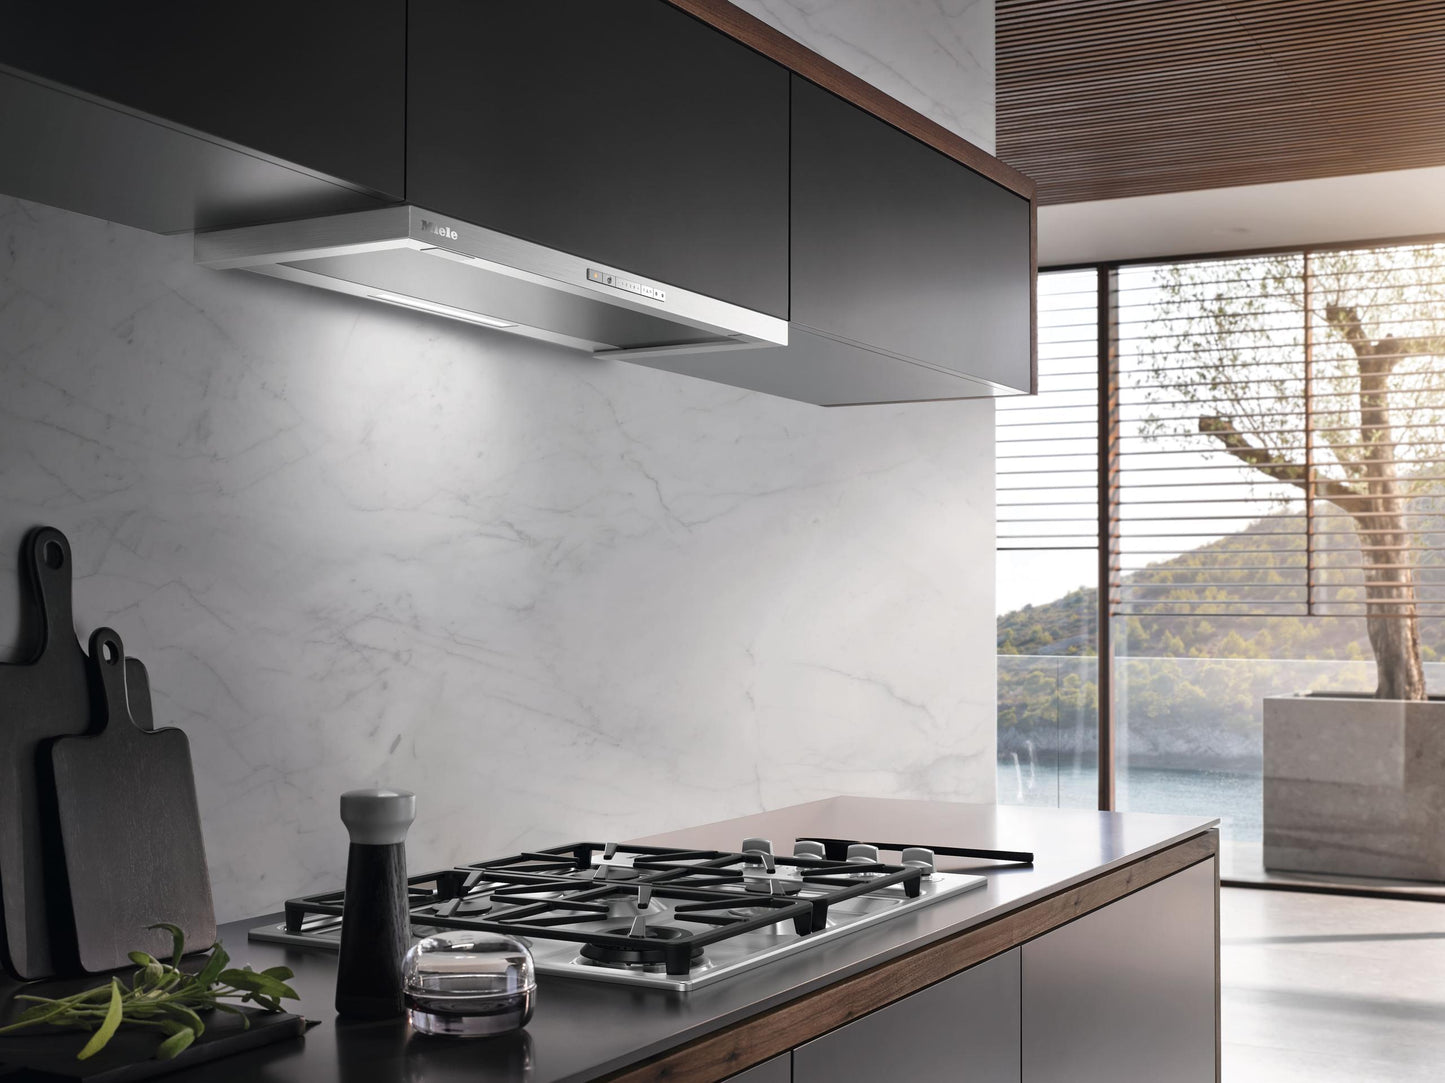 Miele DAS4720STAINLESSSTEEL Das 4720 - Built-In Ventilation Hood For Installation In Narrow Upper Cabinets With Easyswitch Controls